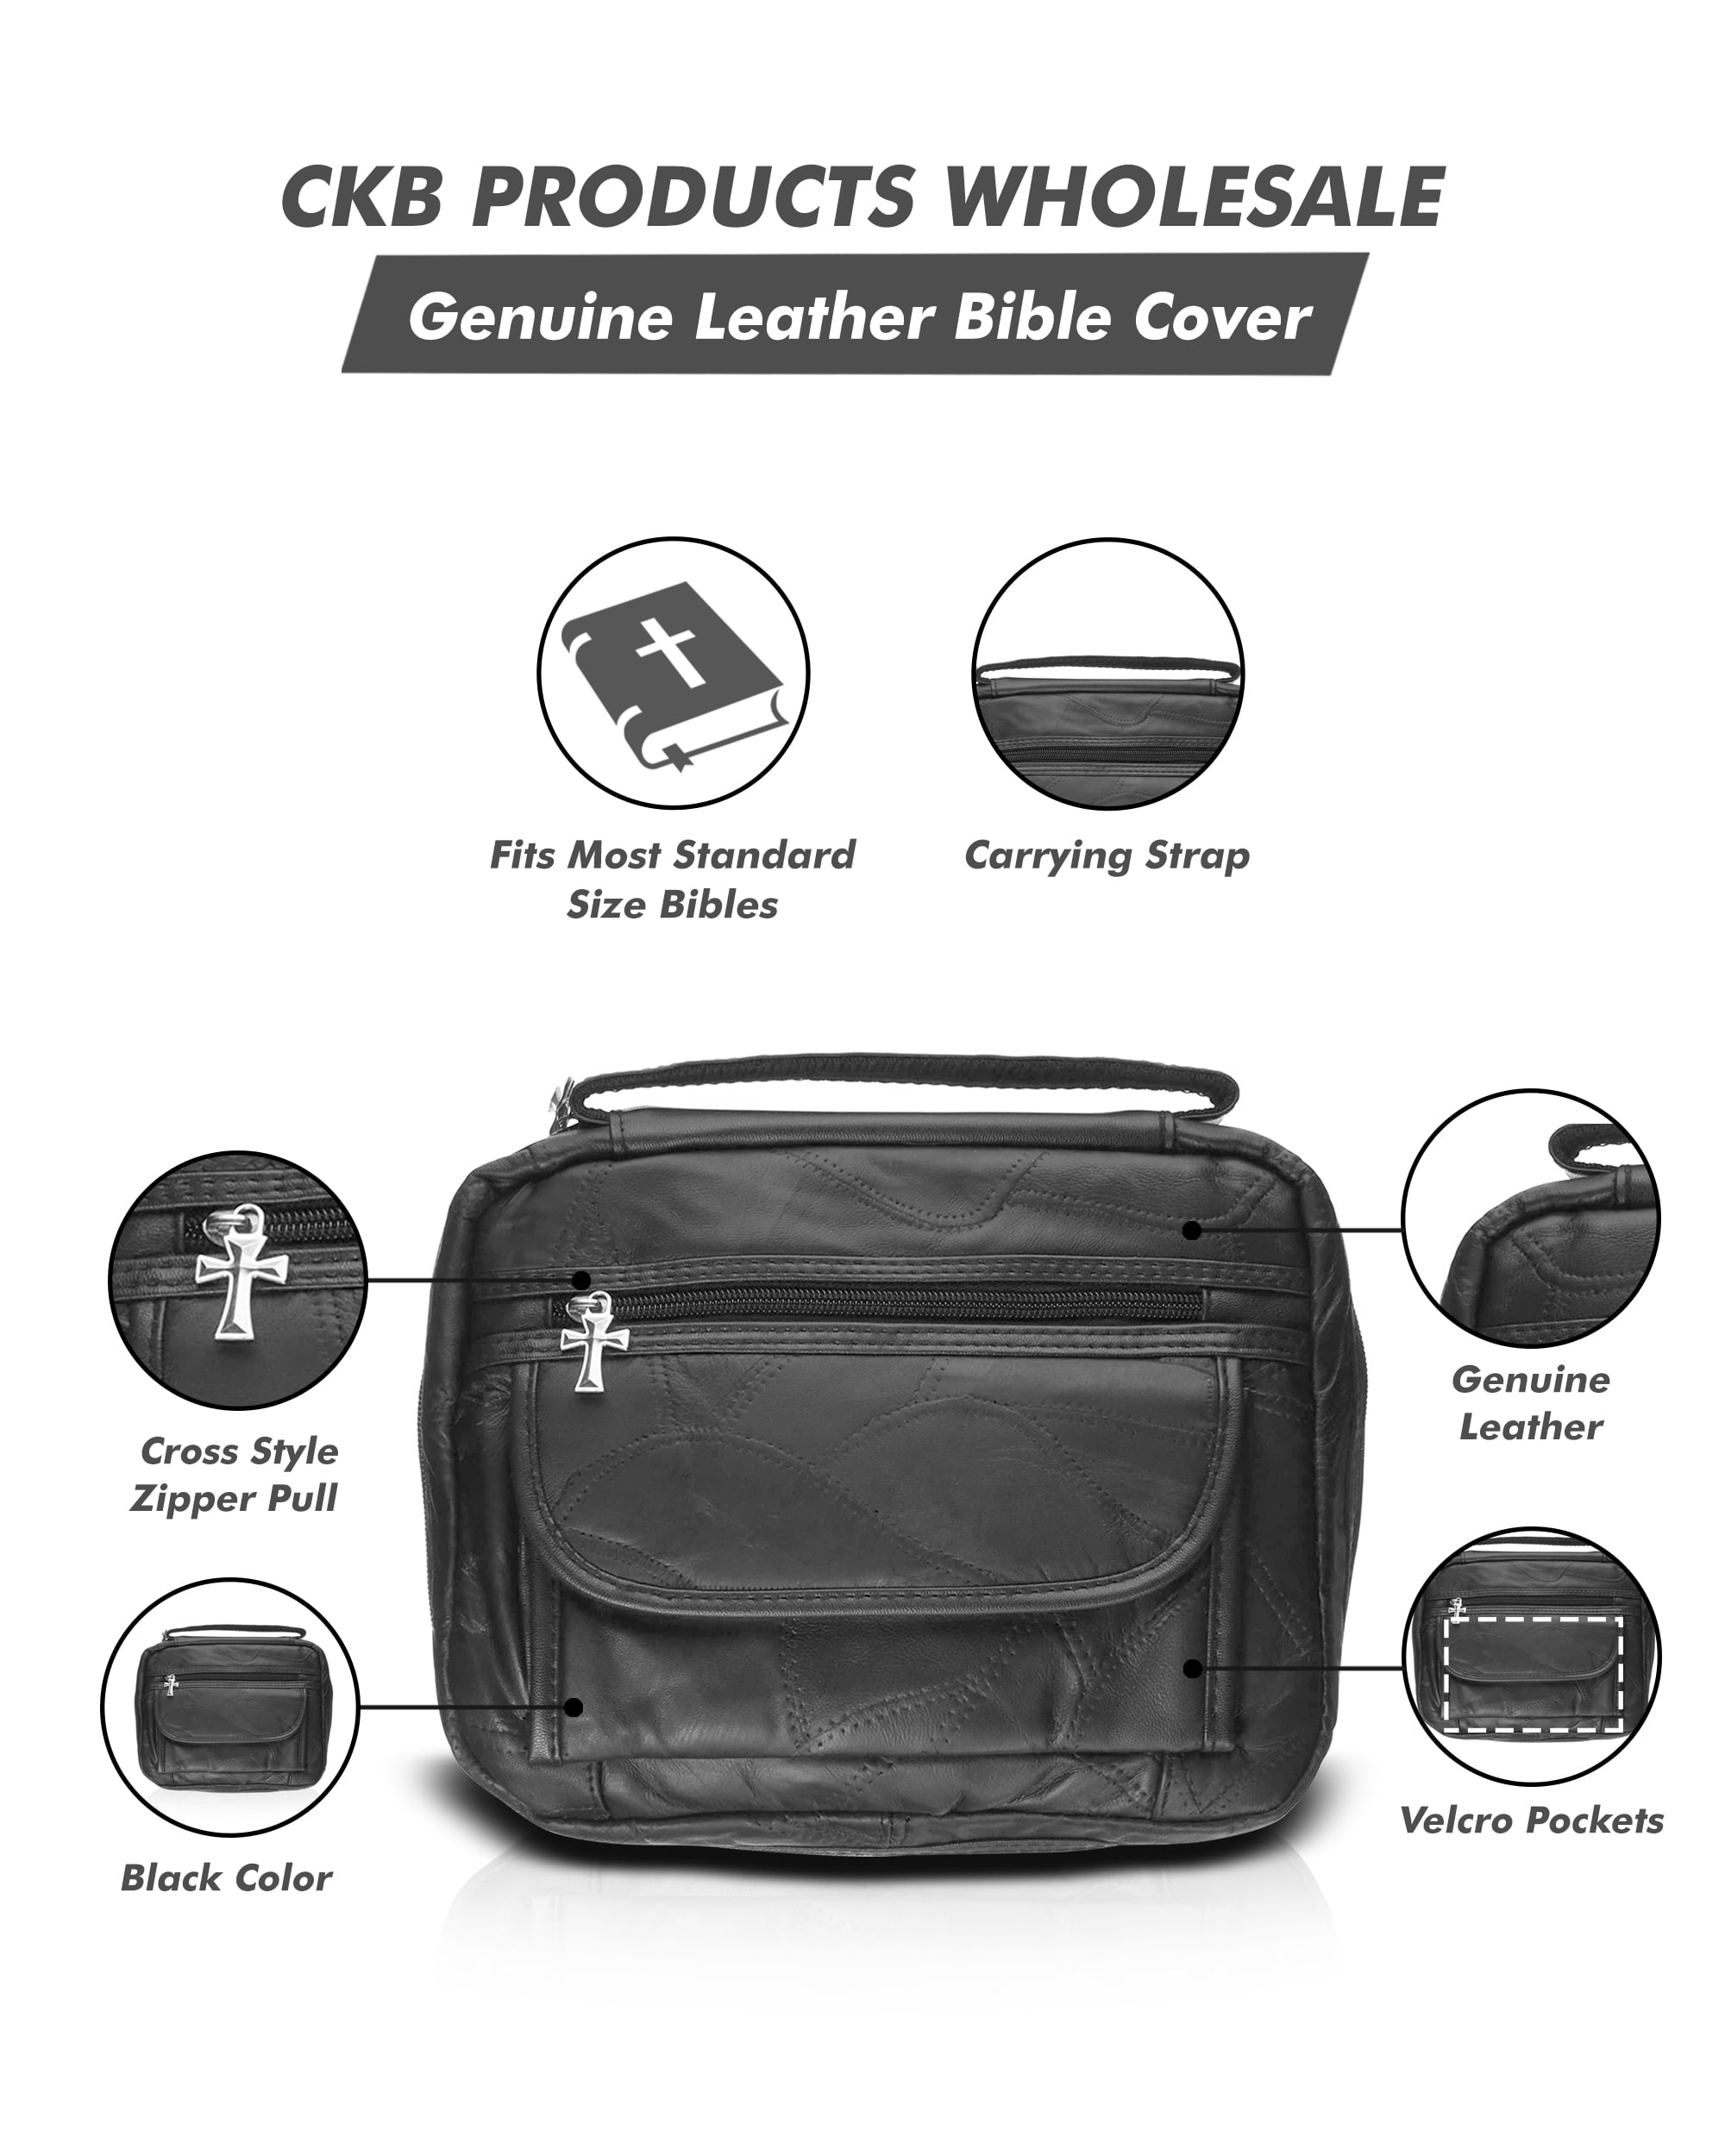 Black Cross 10 x 12.5 inch Leather Like Vinyl Bible Cover Case with Handle